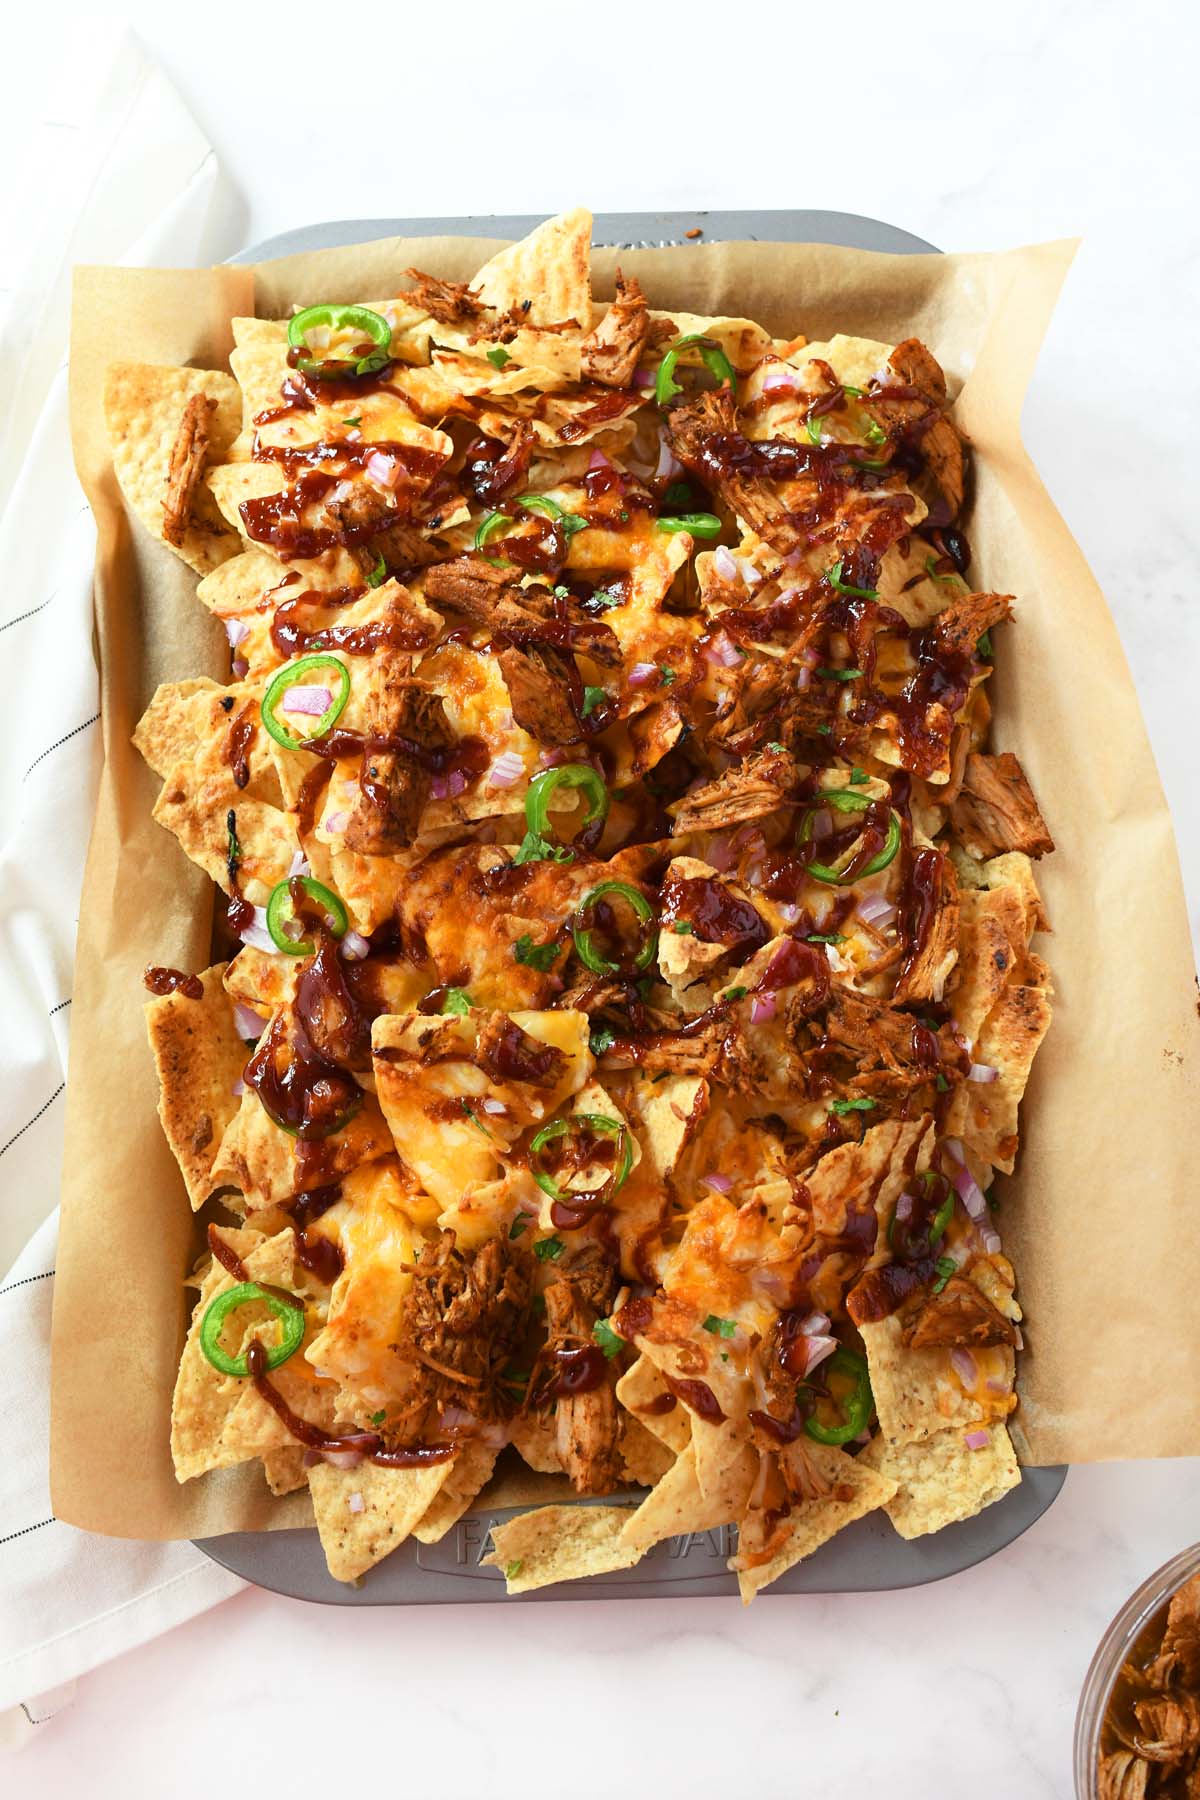 A pan of cheesy, bbq sauce topped pulled pork nachos.